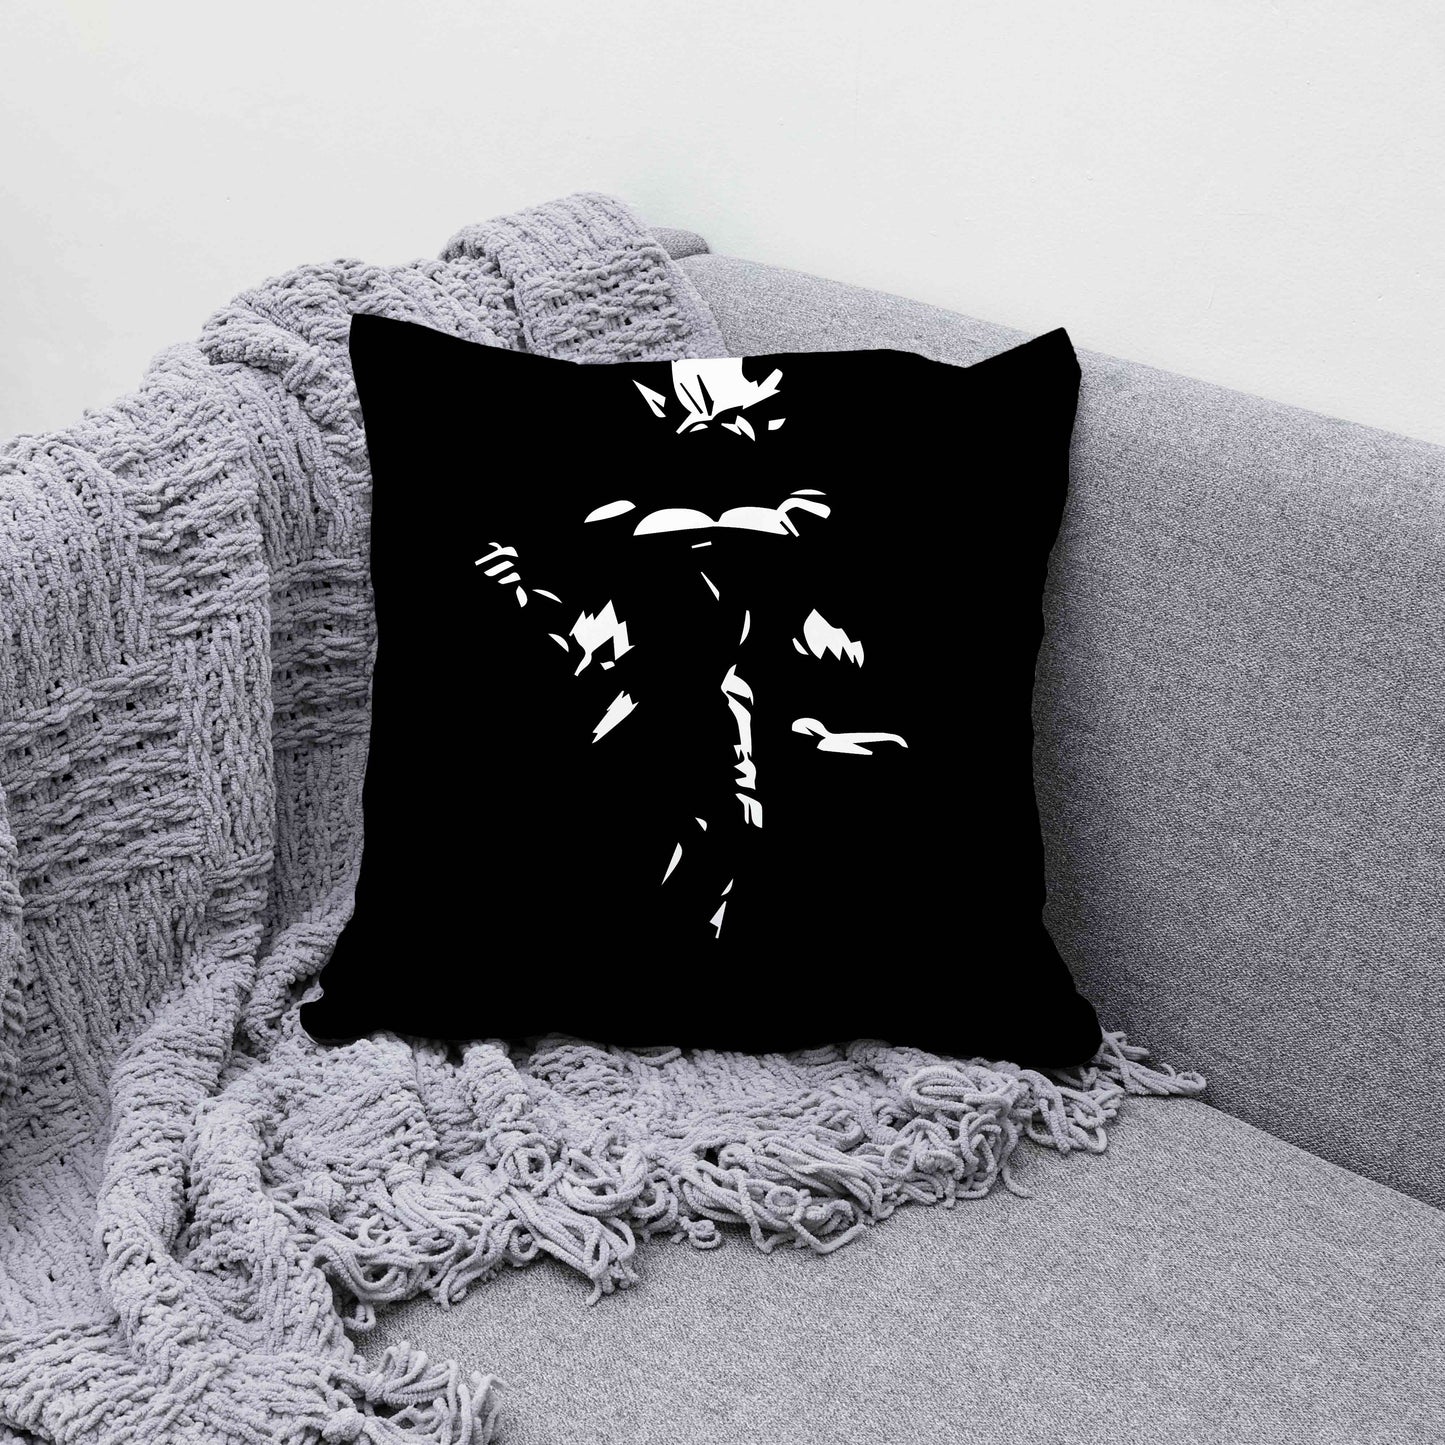 Broly's Rage Cushion Cover trendy home